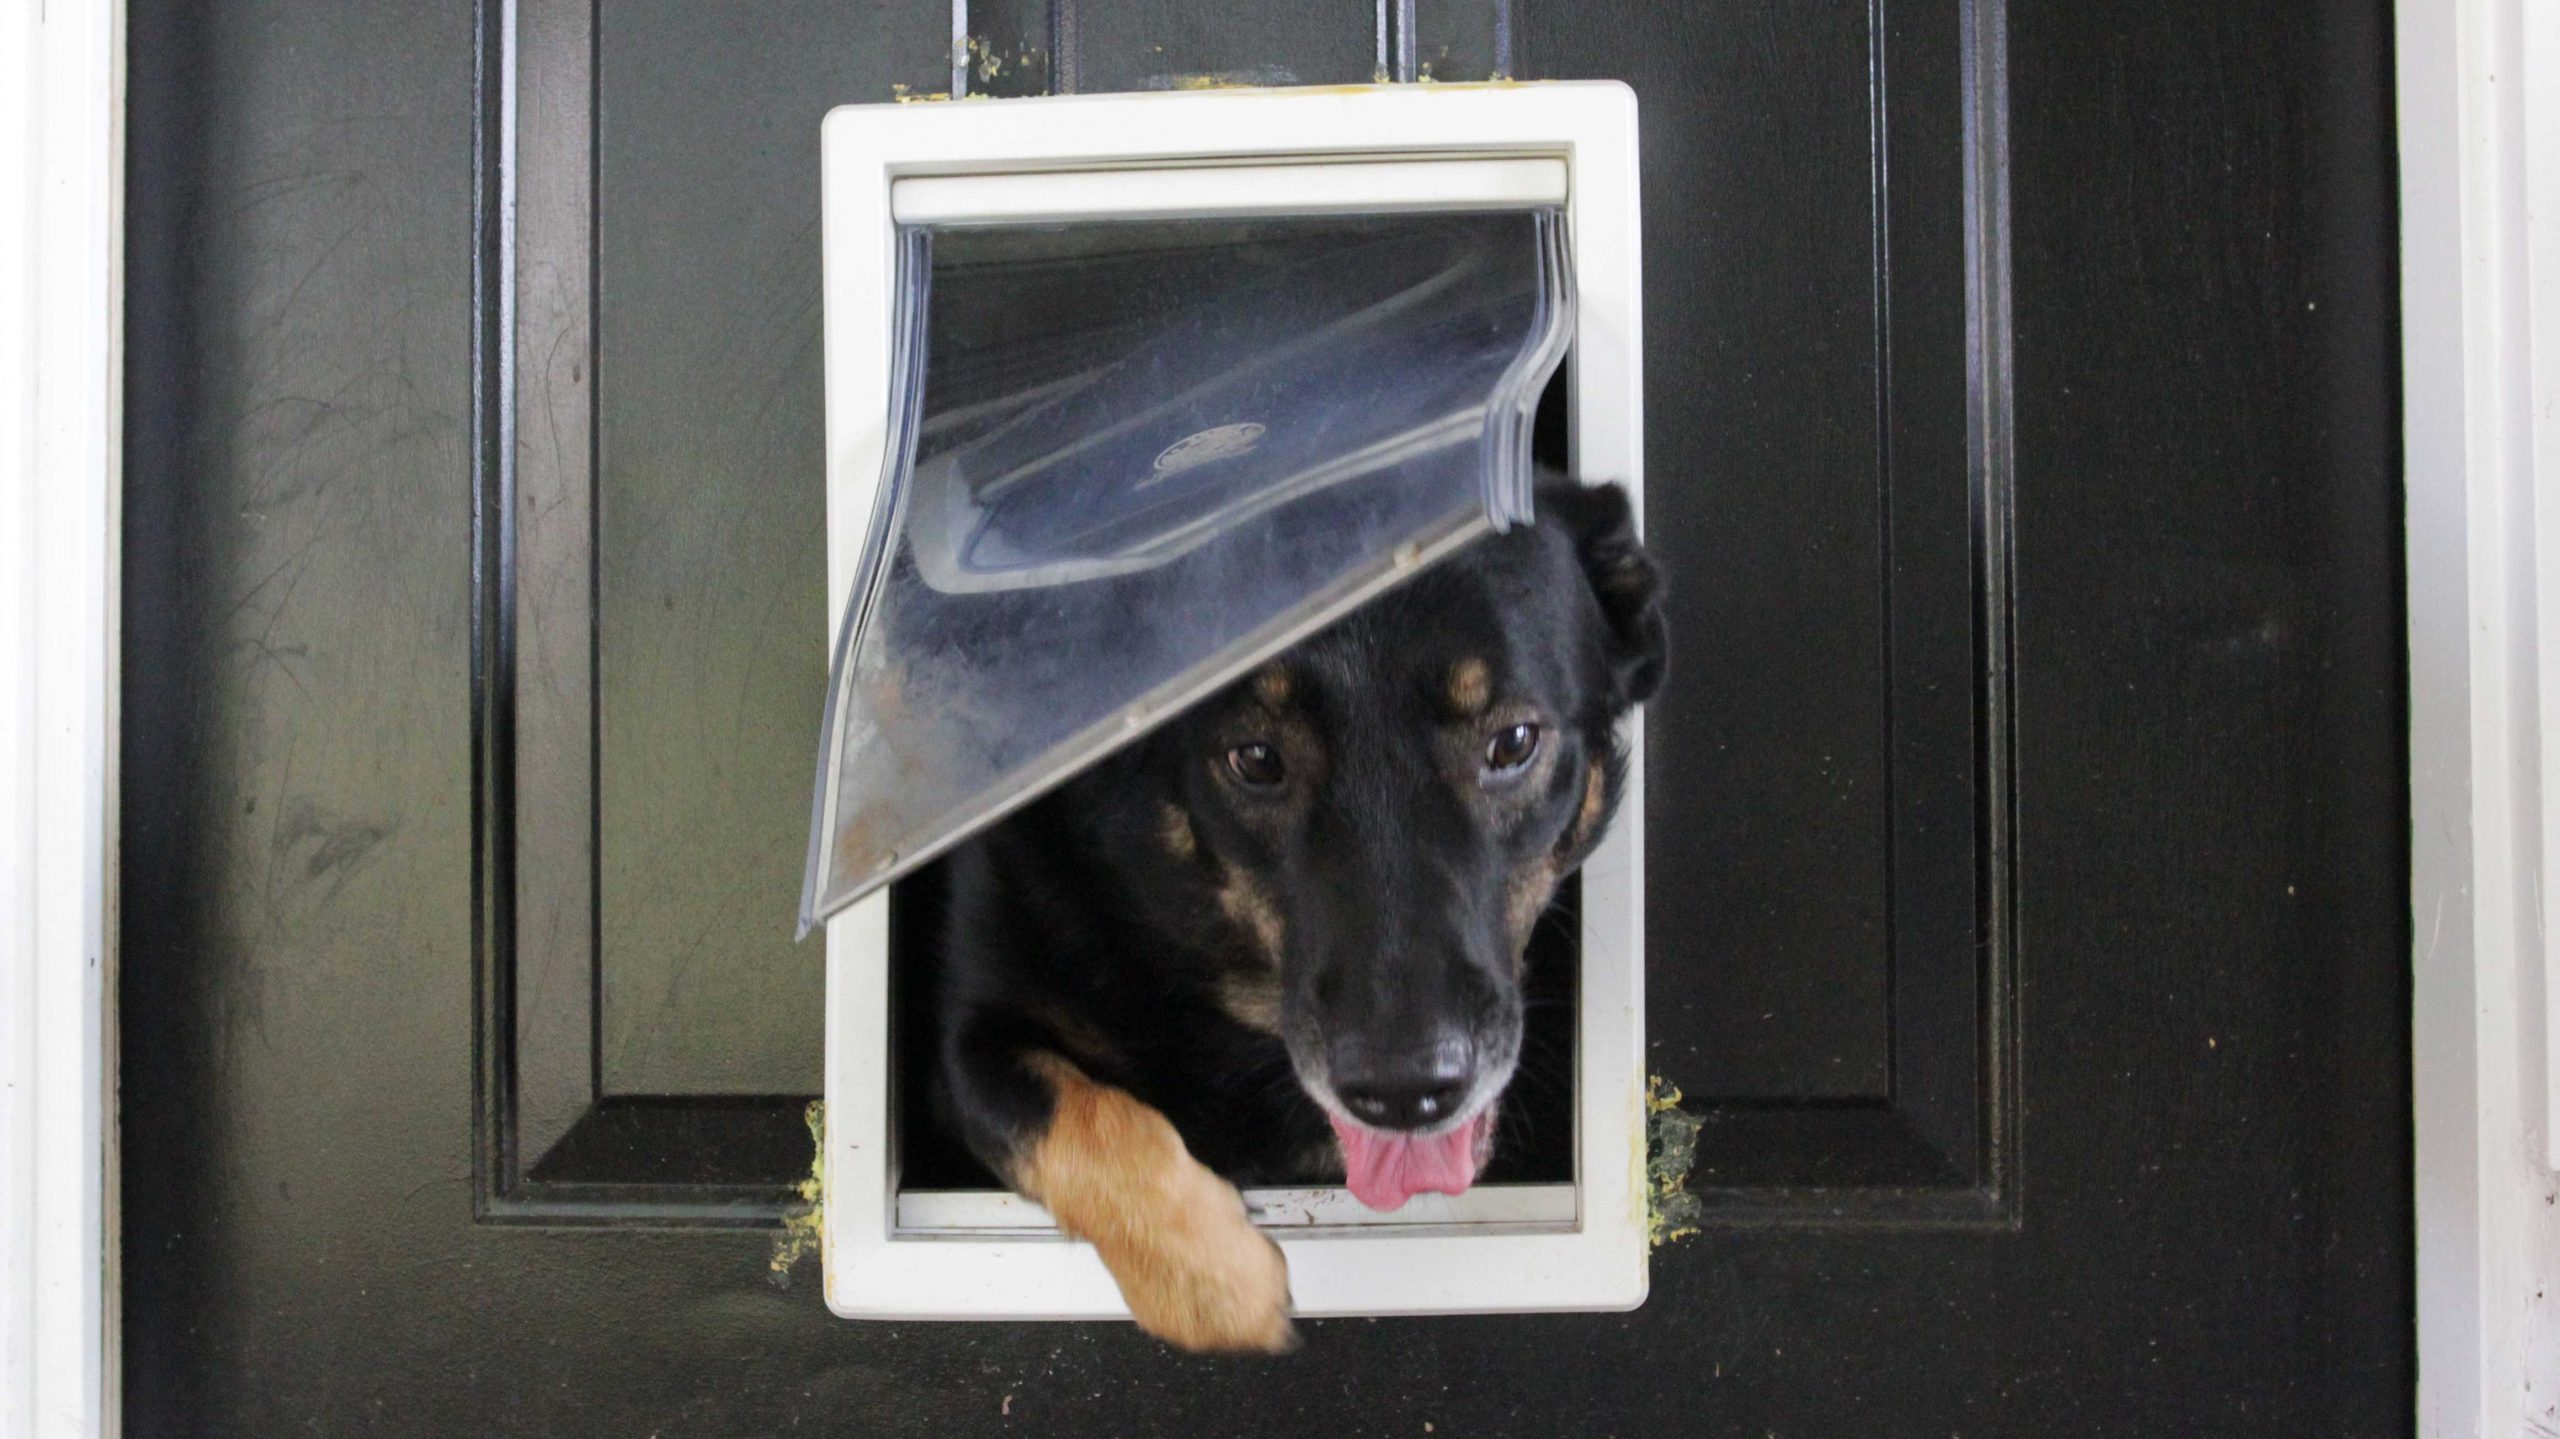 Dog Training: Train Your Dog to Use the Pet Door - BeChewy